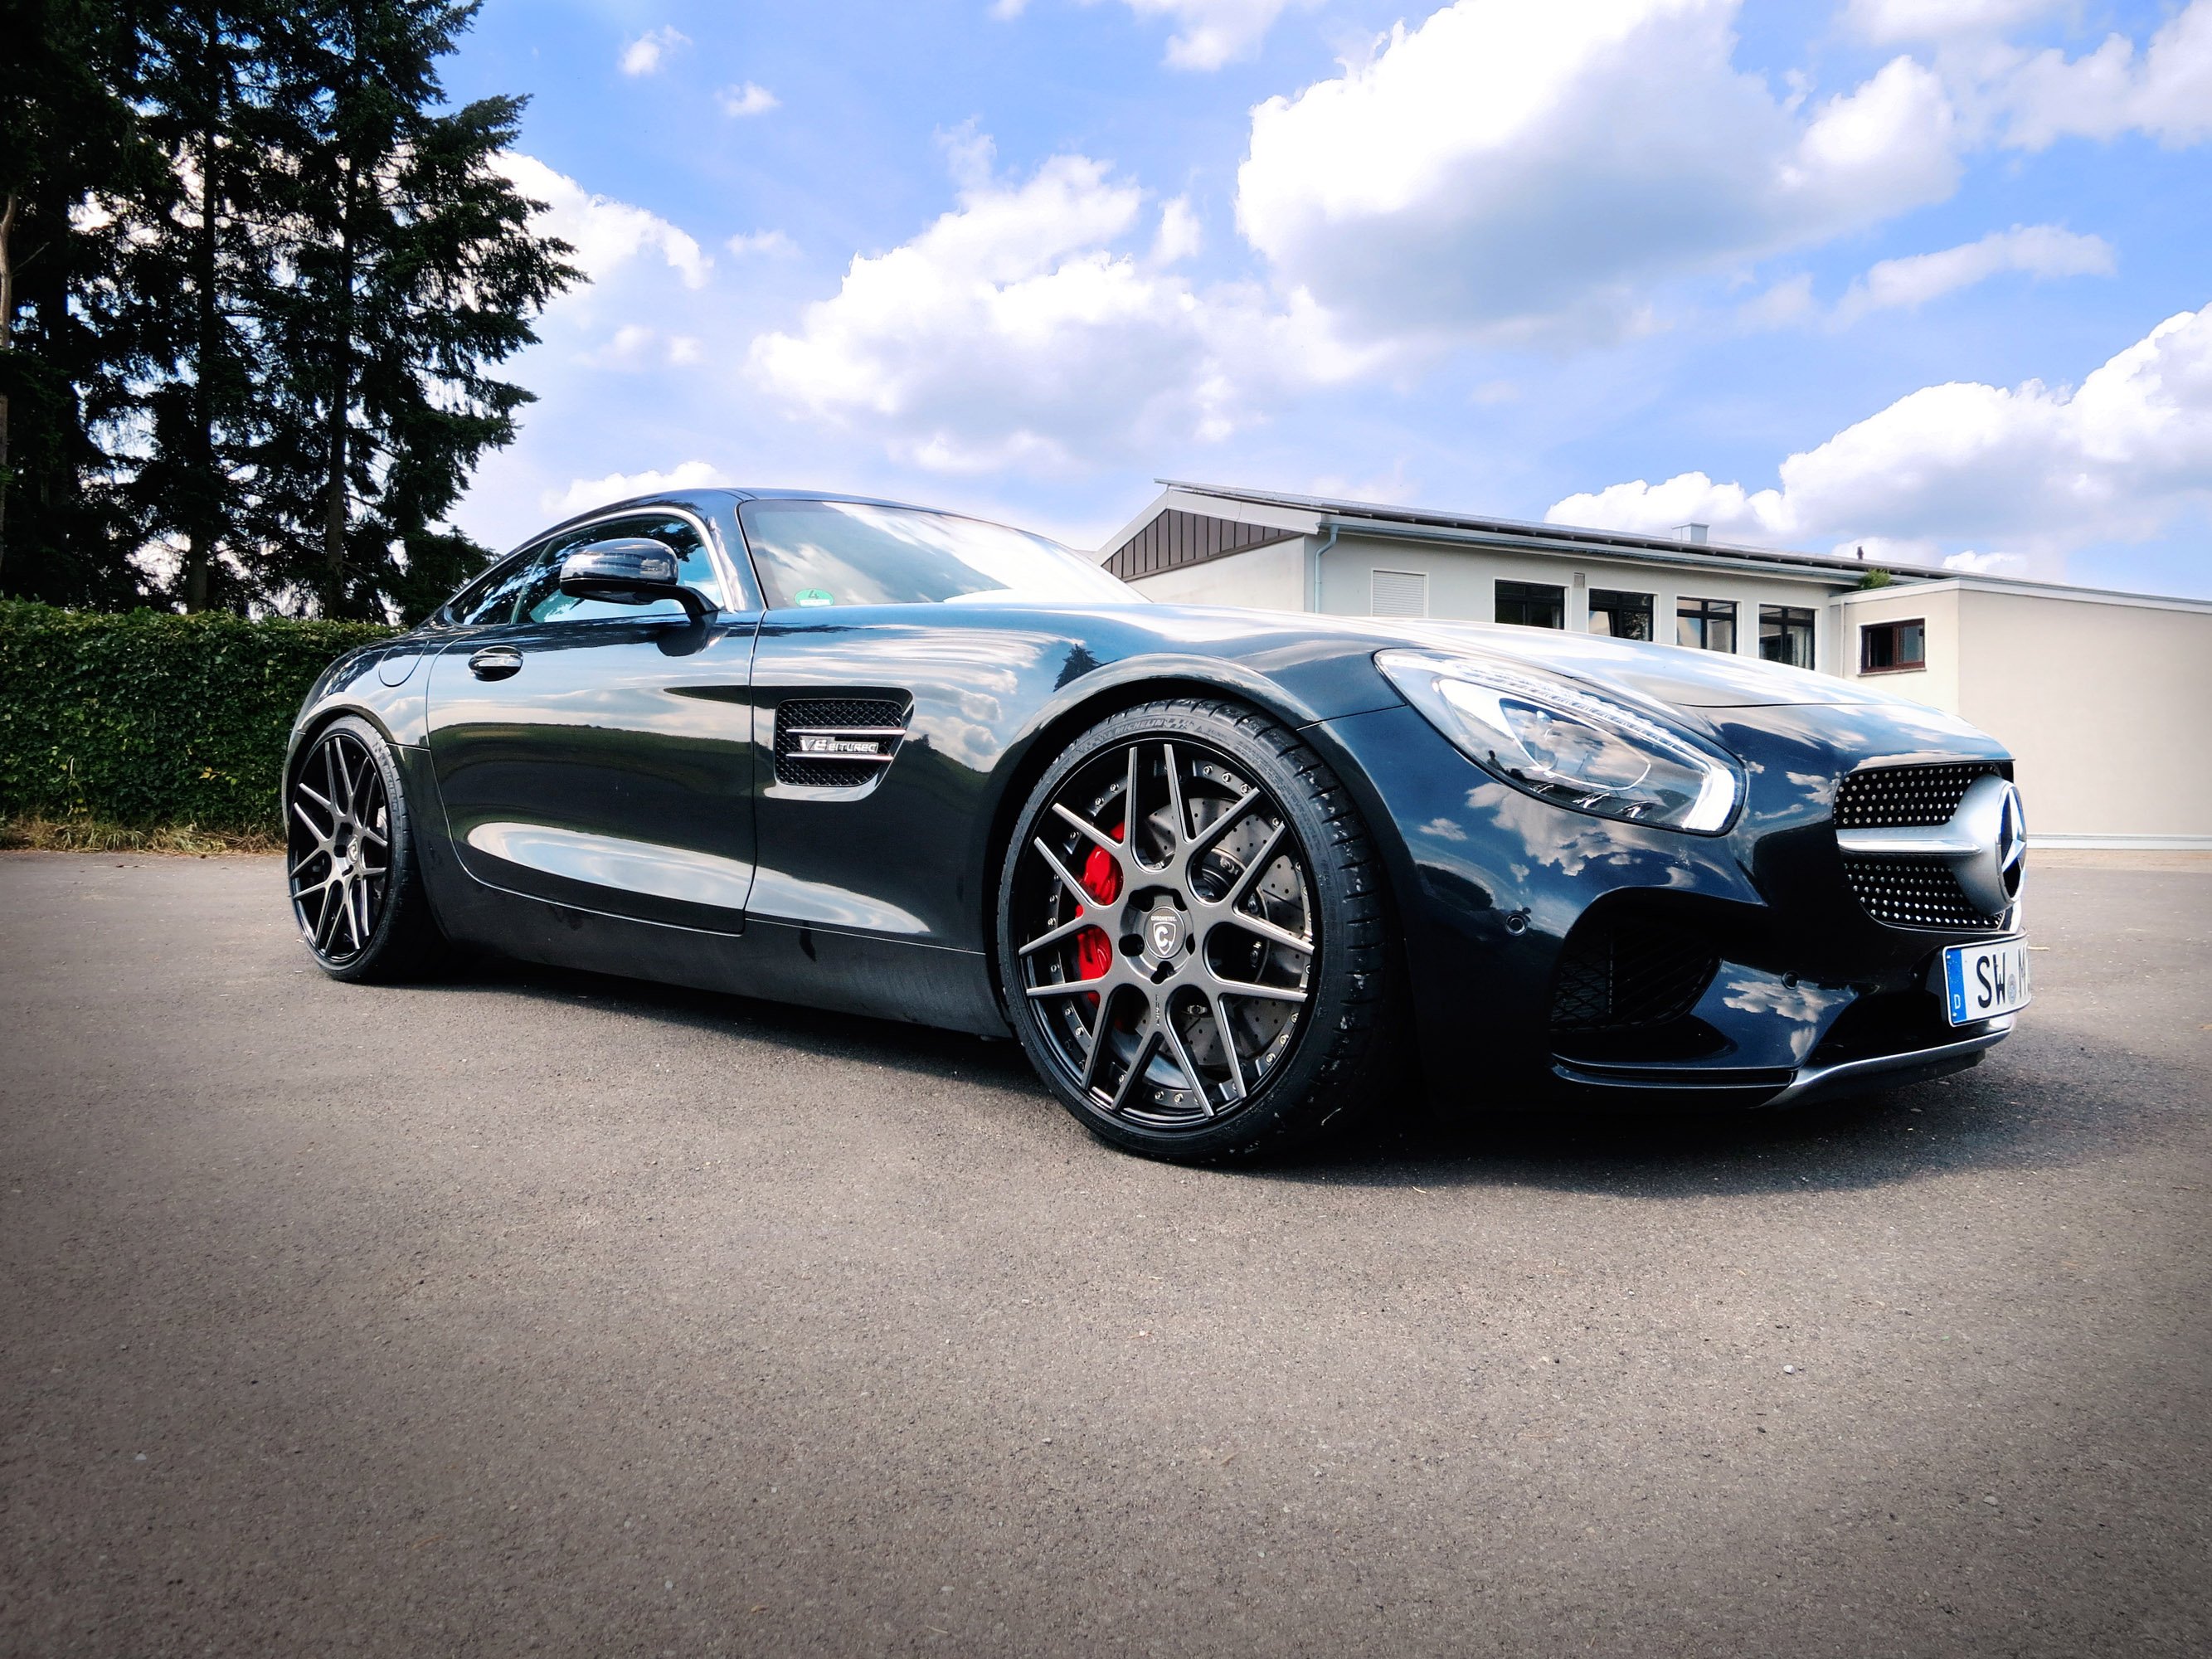 2015, Mercedes, Gts, Loma, Wheels, Coupe, Cars Wallpaper